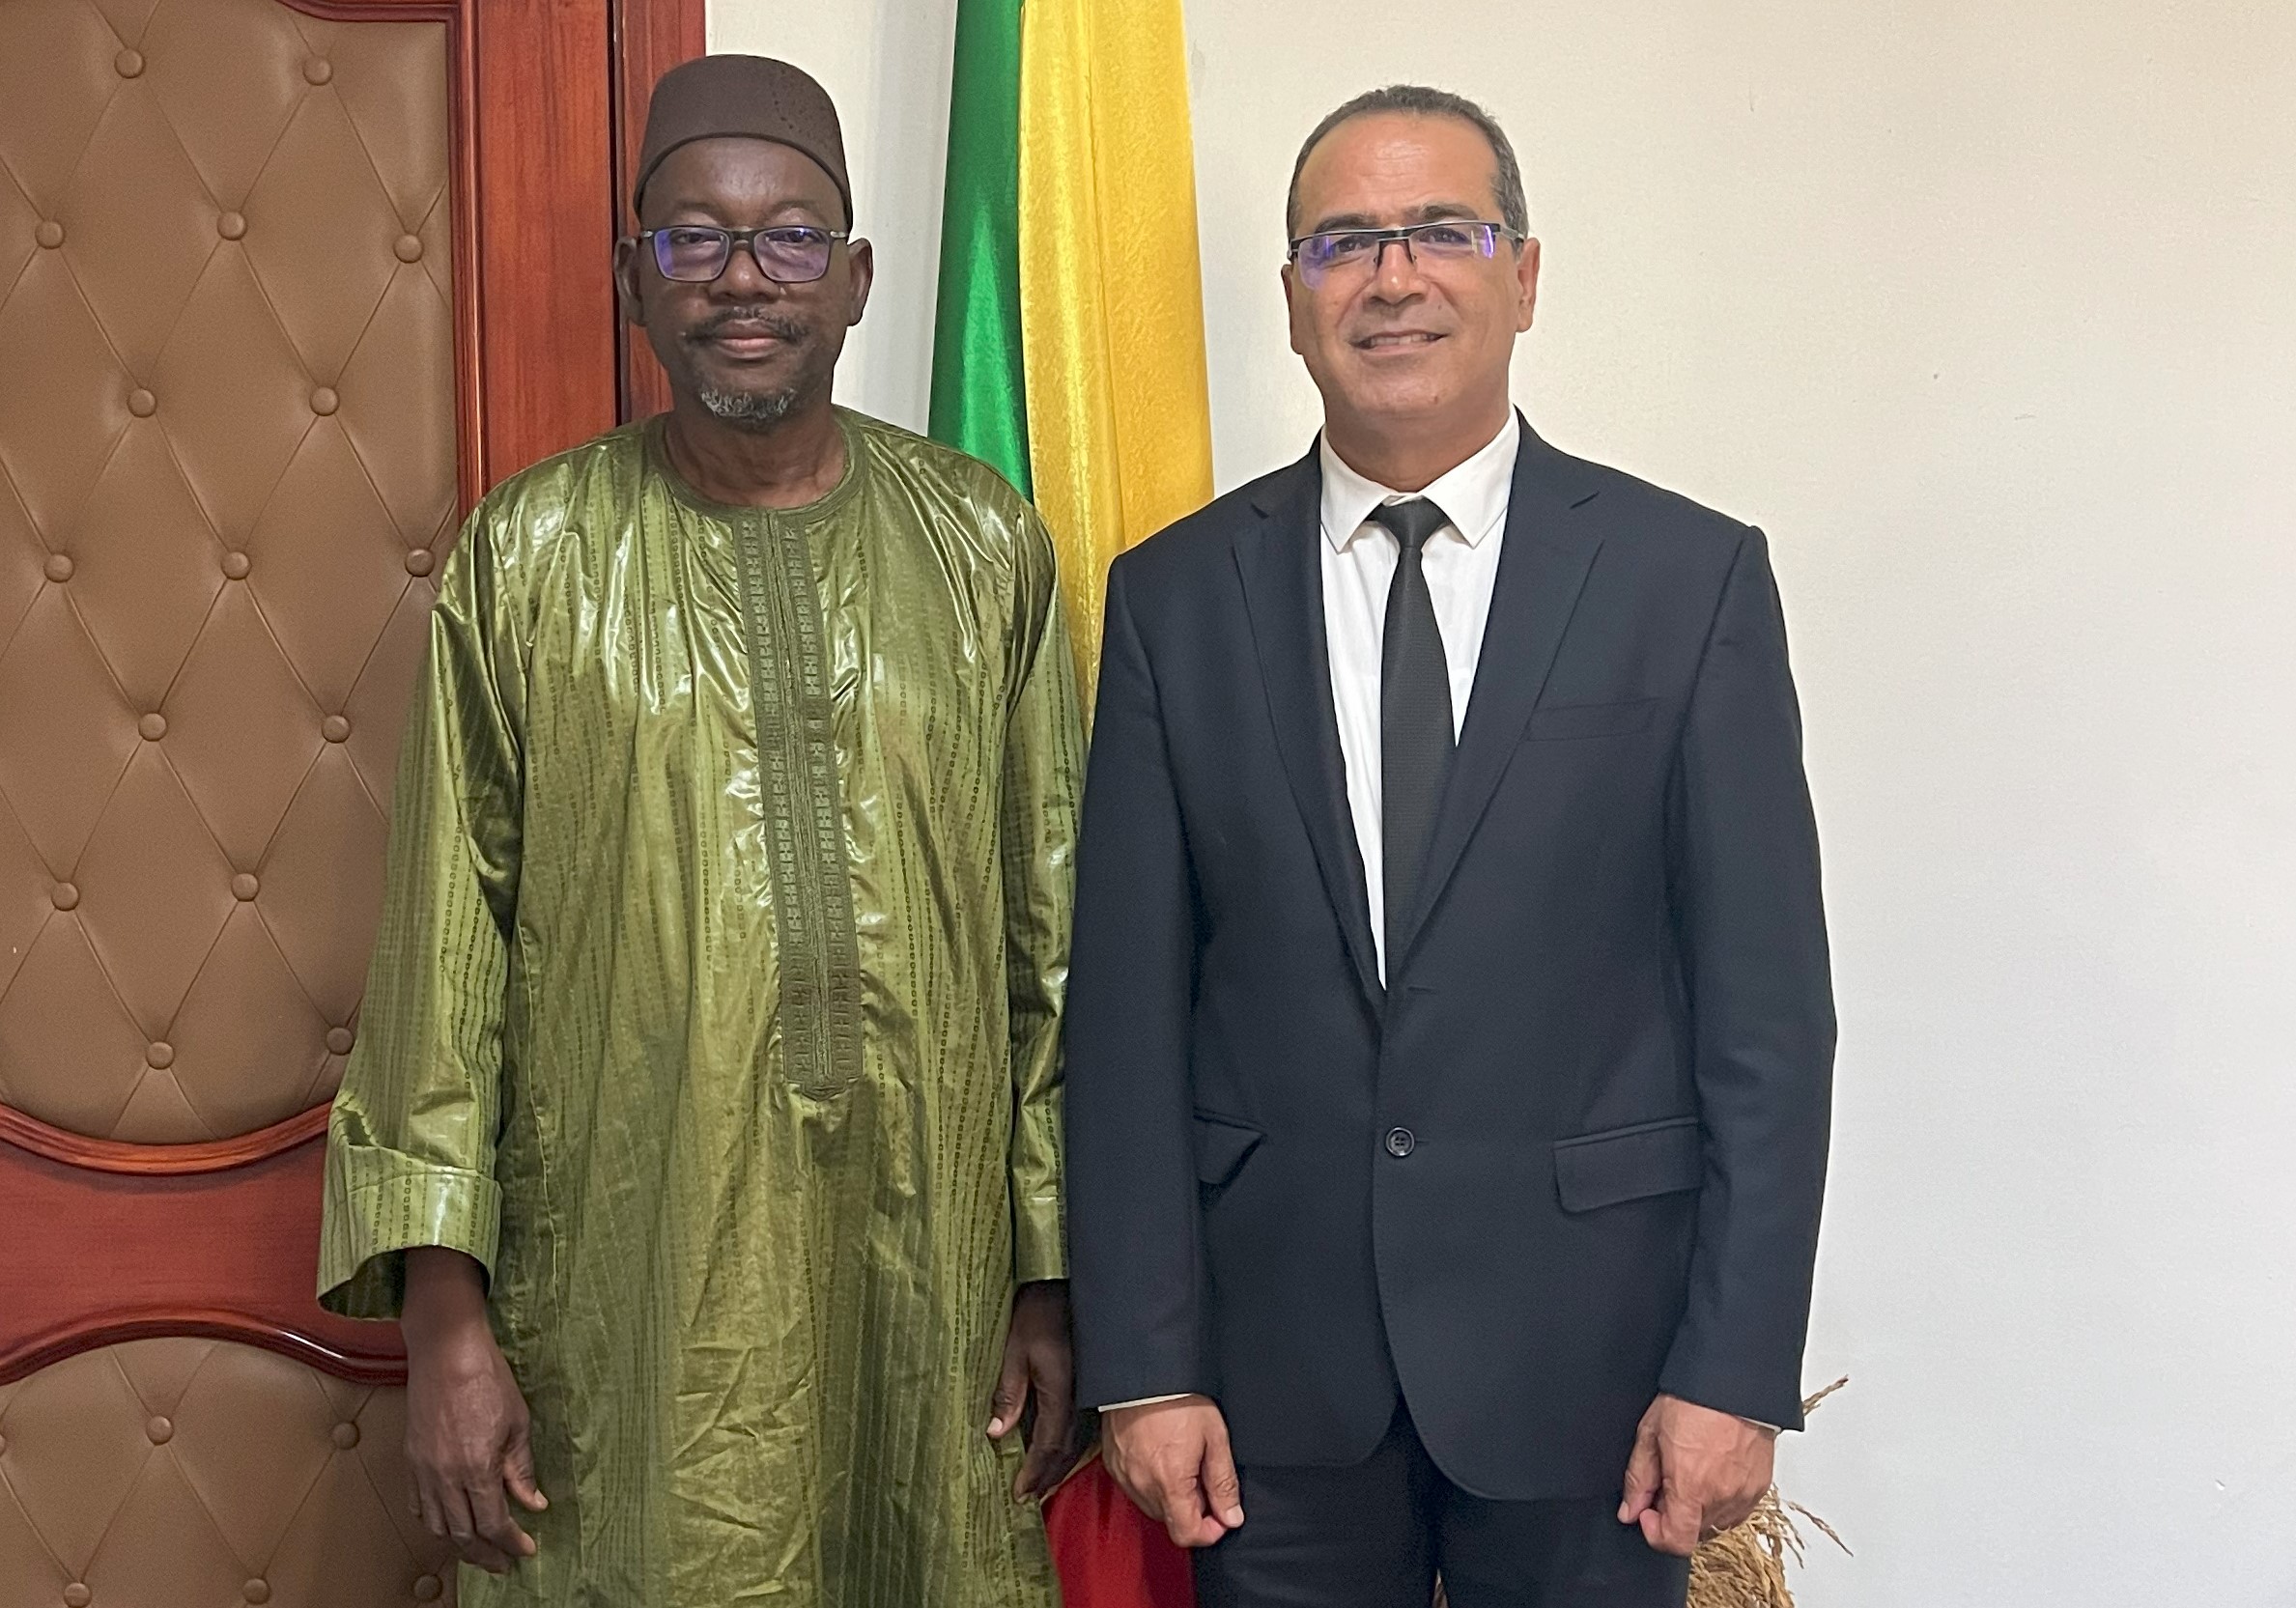 Meeting in Bamako with Mr. Lassine DEMBELE, Minister of Agriculture of Mali